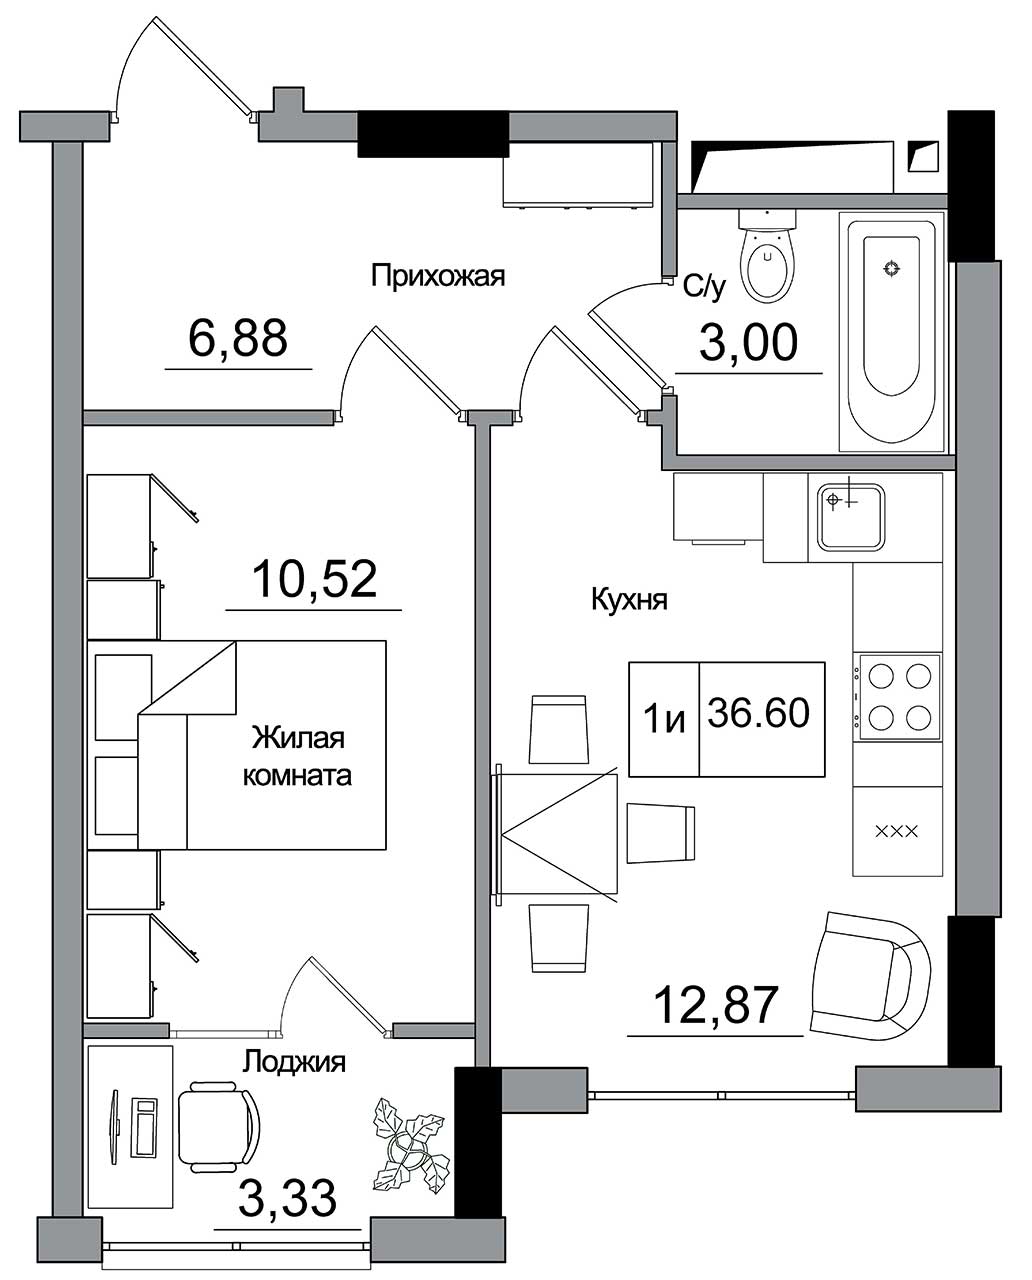 Planning 1-rm flats area 36.6m2, AB-16-02/00012.